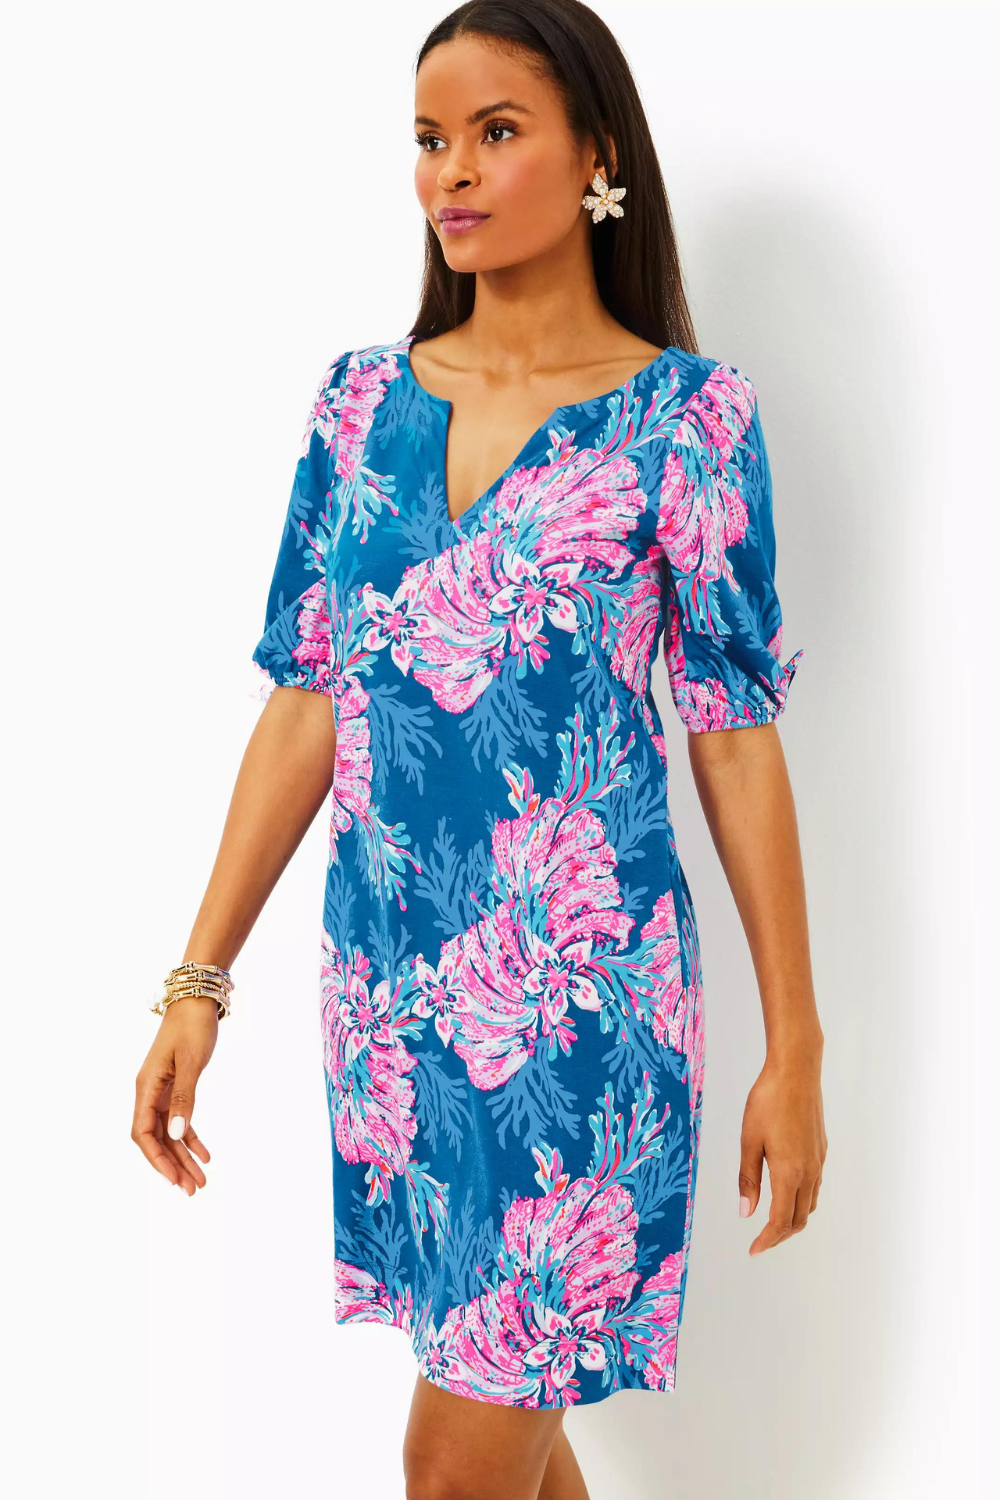 Lilly Pulitzer Easley Short Sleeve Dress - For the Fans